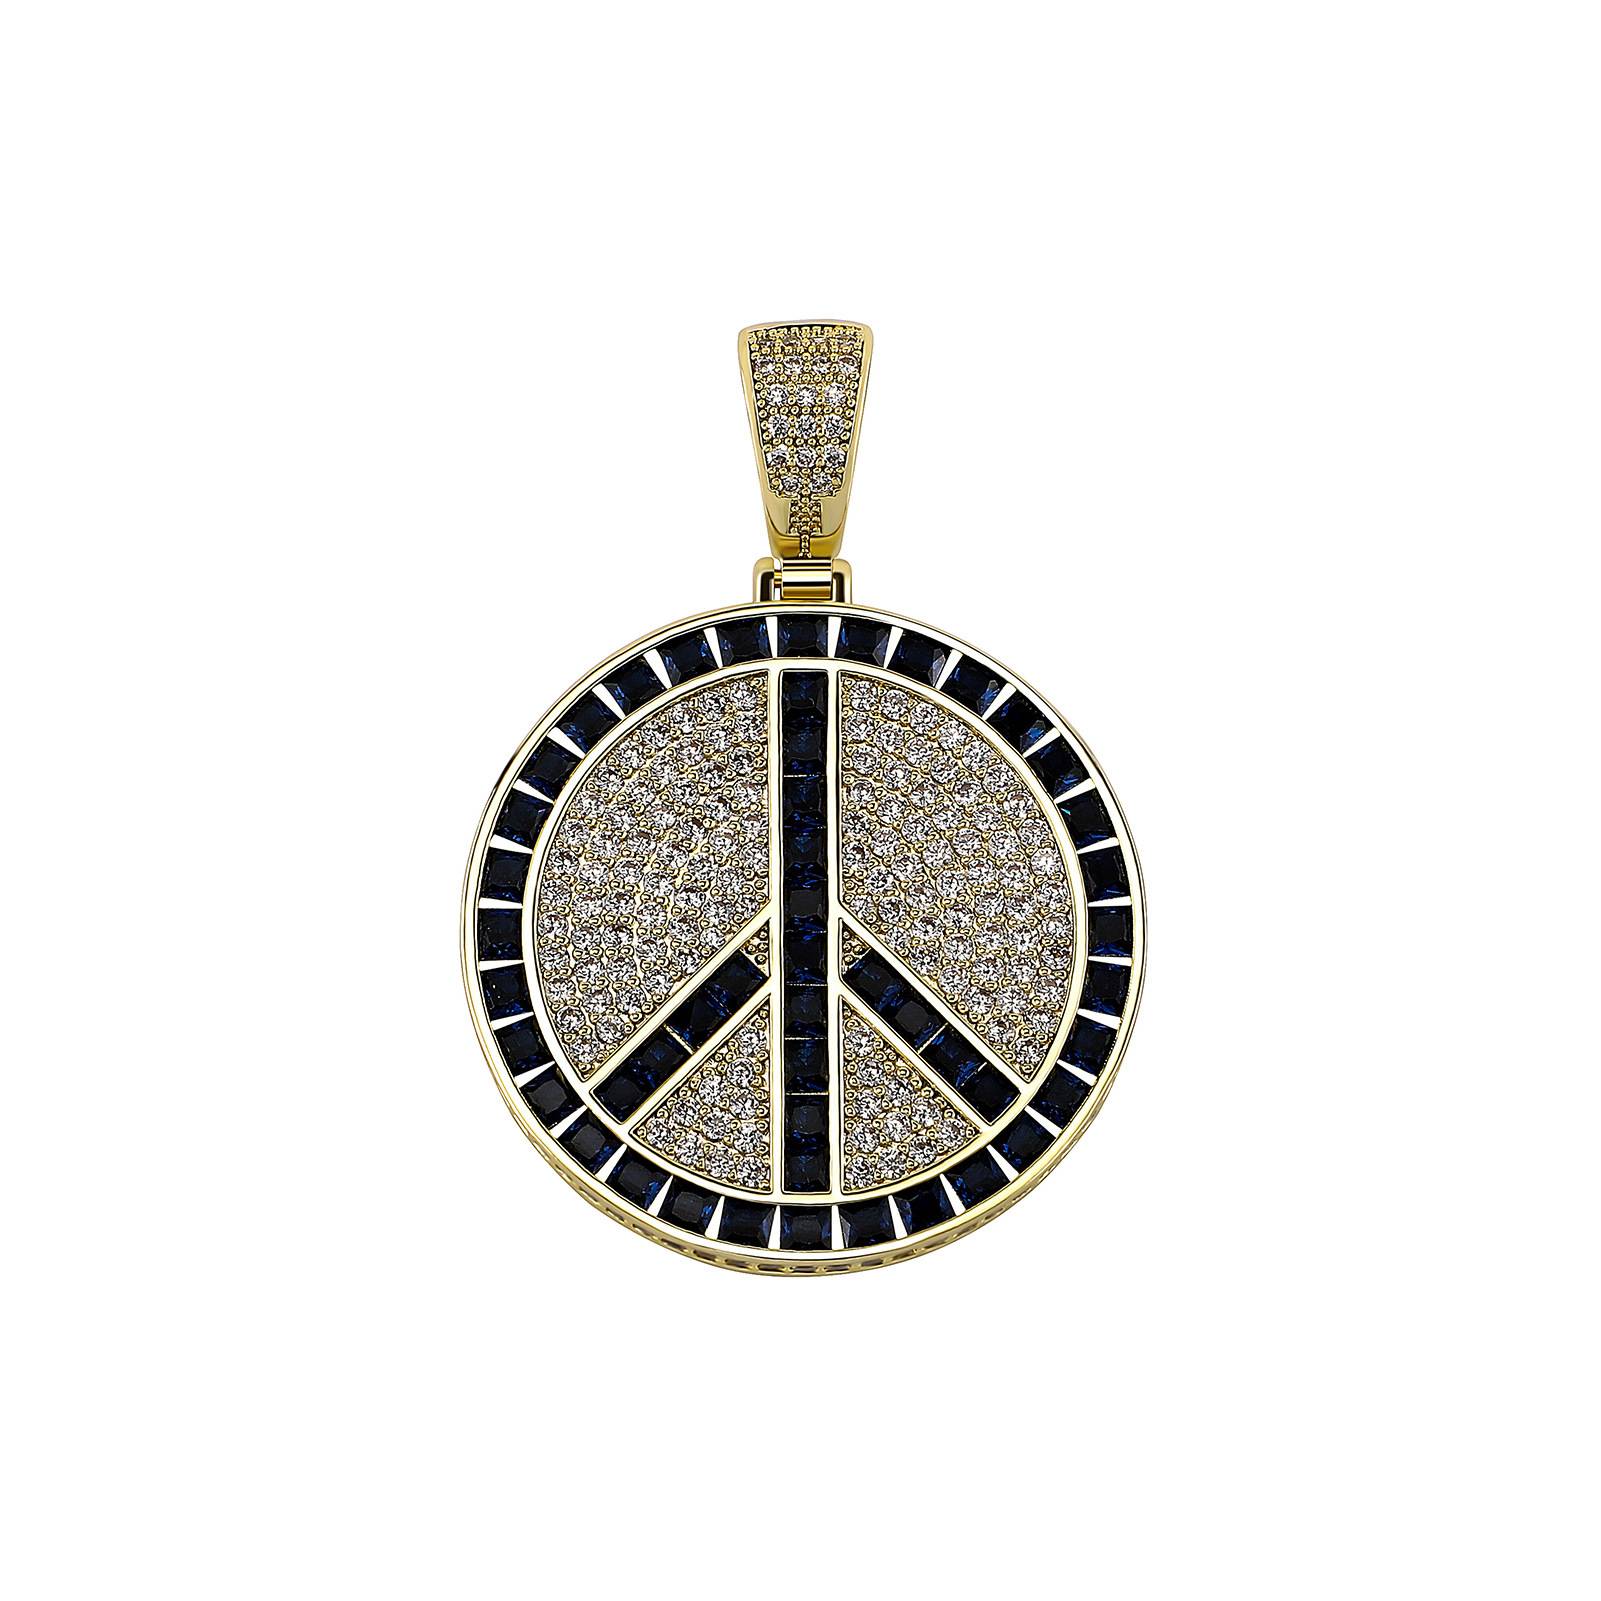 High Quality Wholesale New Fashion Hip Hop Jewelry 14K Gold Plated Iced Out CZ Peace And Love Medallion Pendant Necklace Jewelry